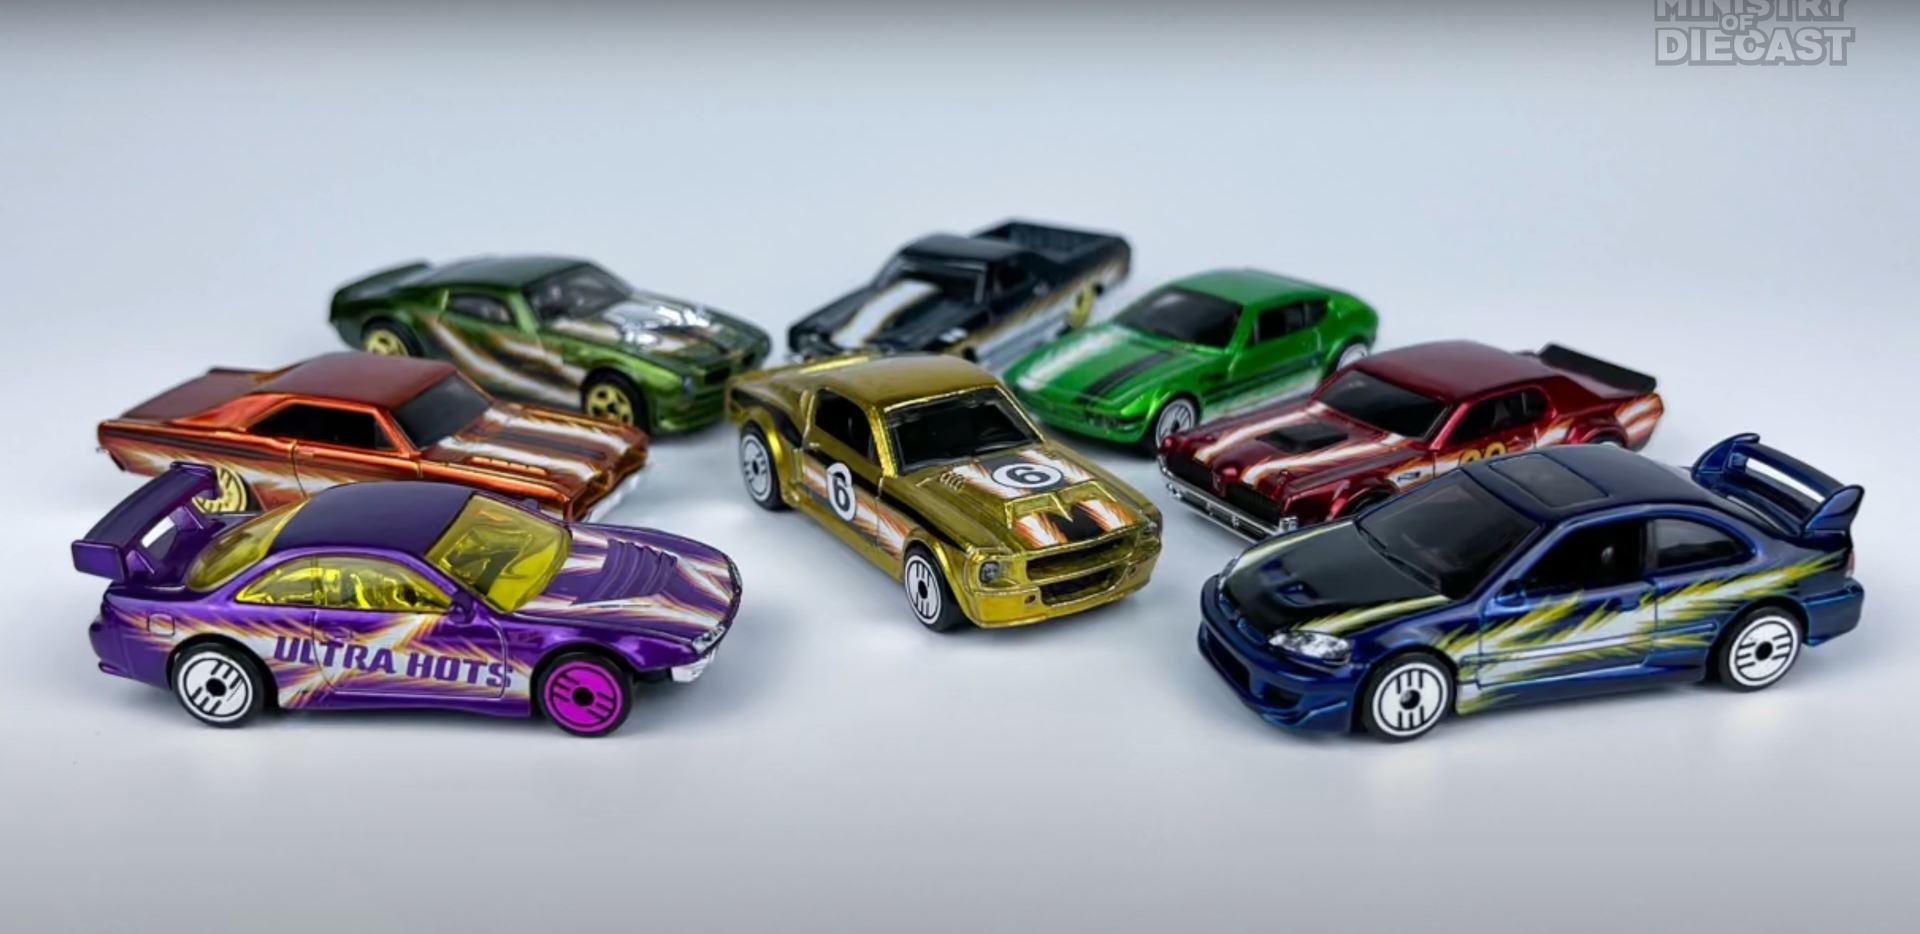 Hot Wheels Ultra Hots Is One Cool Throwback to the '80s, There Are